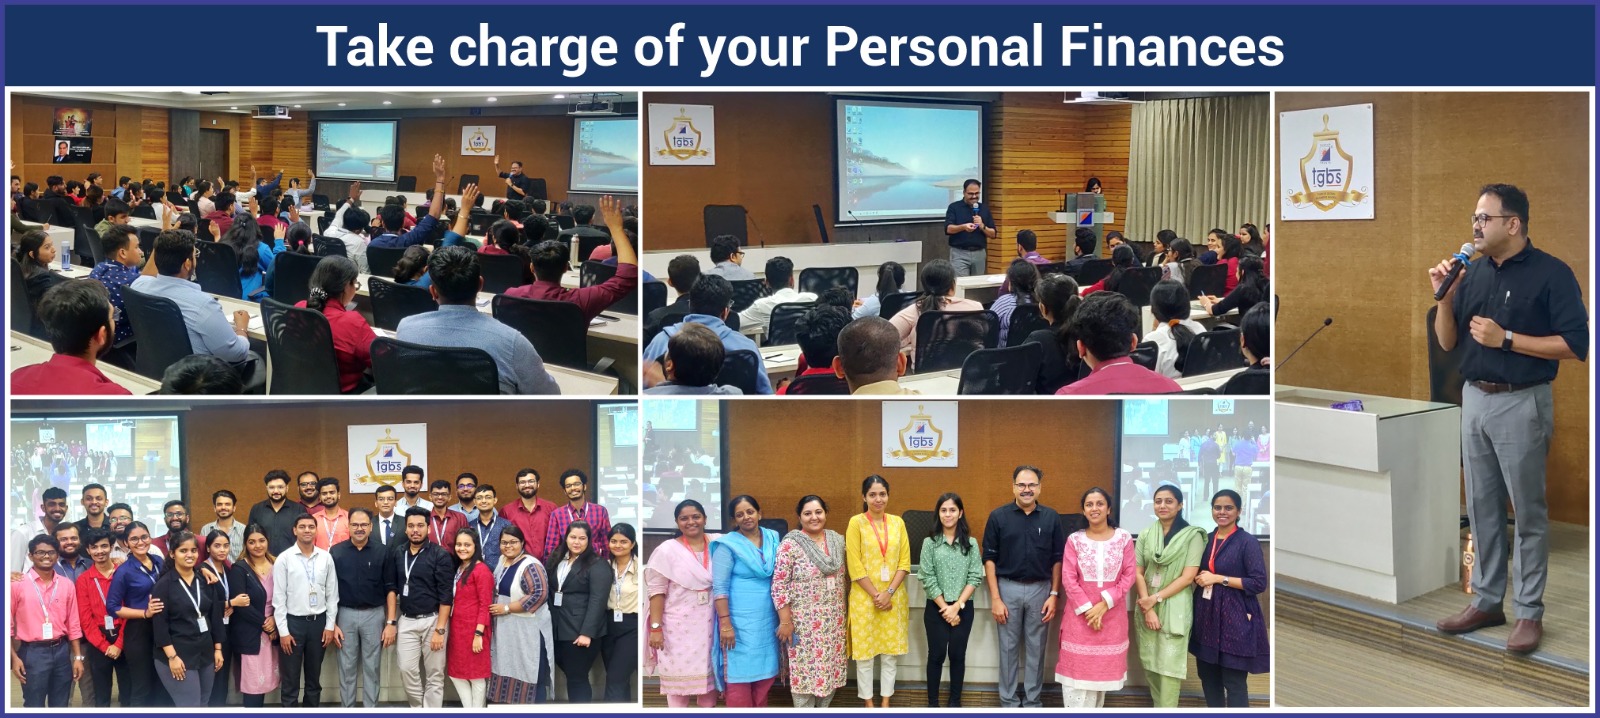 Take charge of your Personal Finance